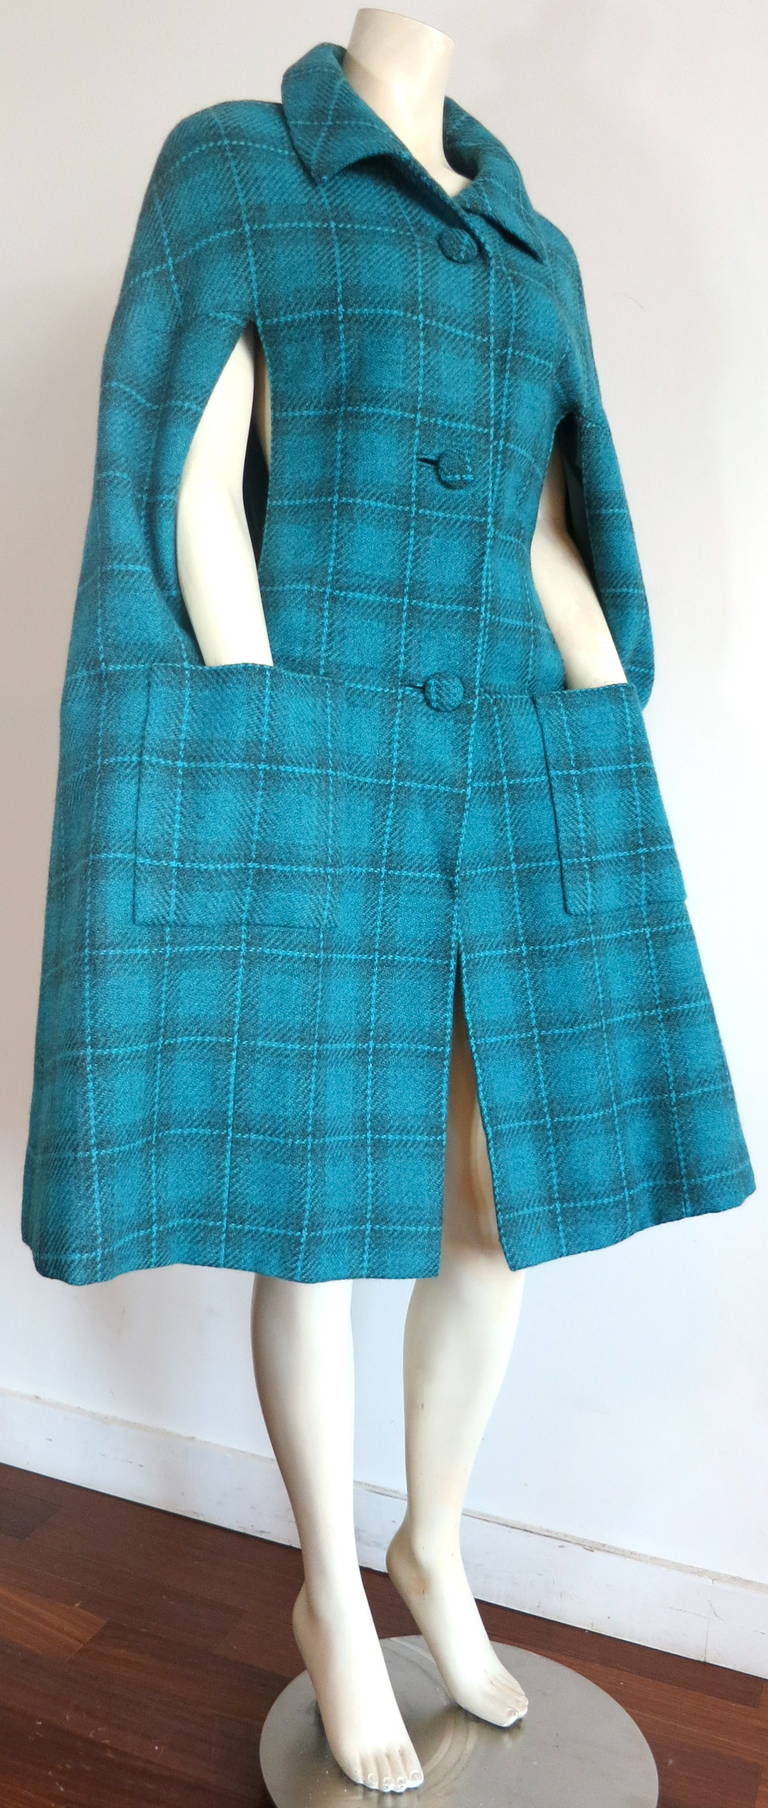 Excellent condition SYBIL CONNOLLY Irish tweed plaid cape coat.

This beautiful cape was designed by Sybil Connolly during the 1950's in Ireland, as labeled.

The beautiful turquoise color is very vibrant and clean.

The cap features triple